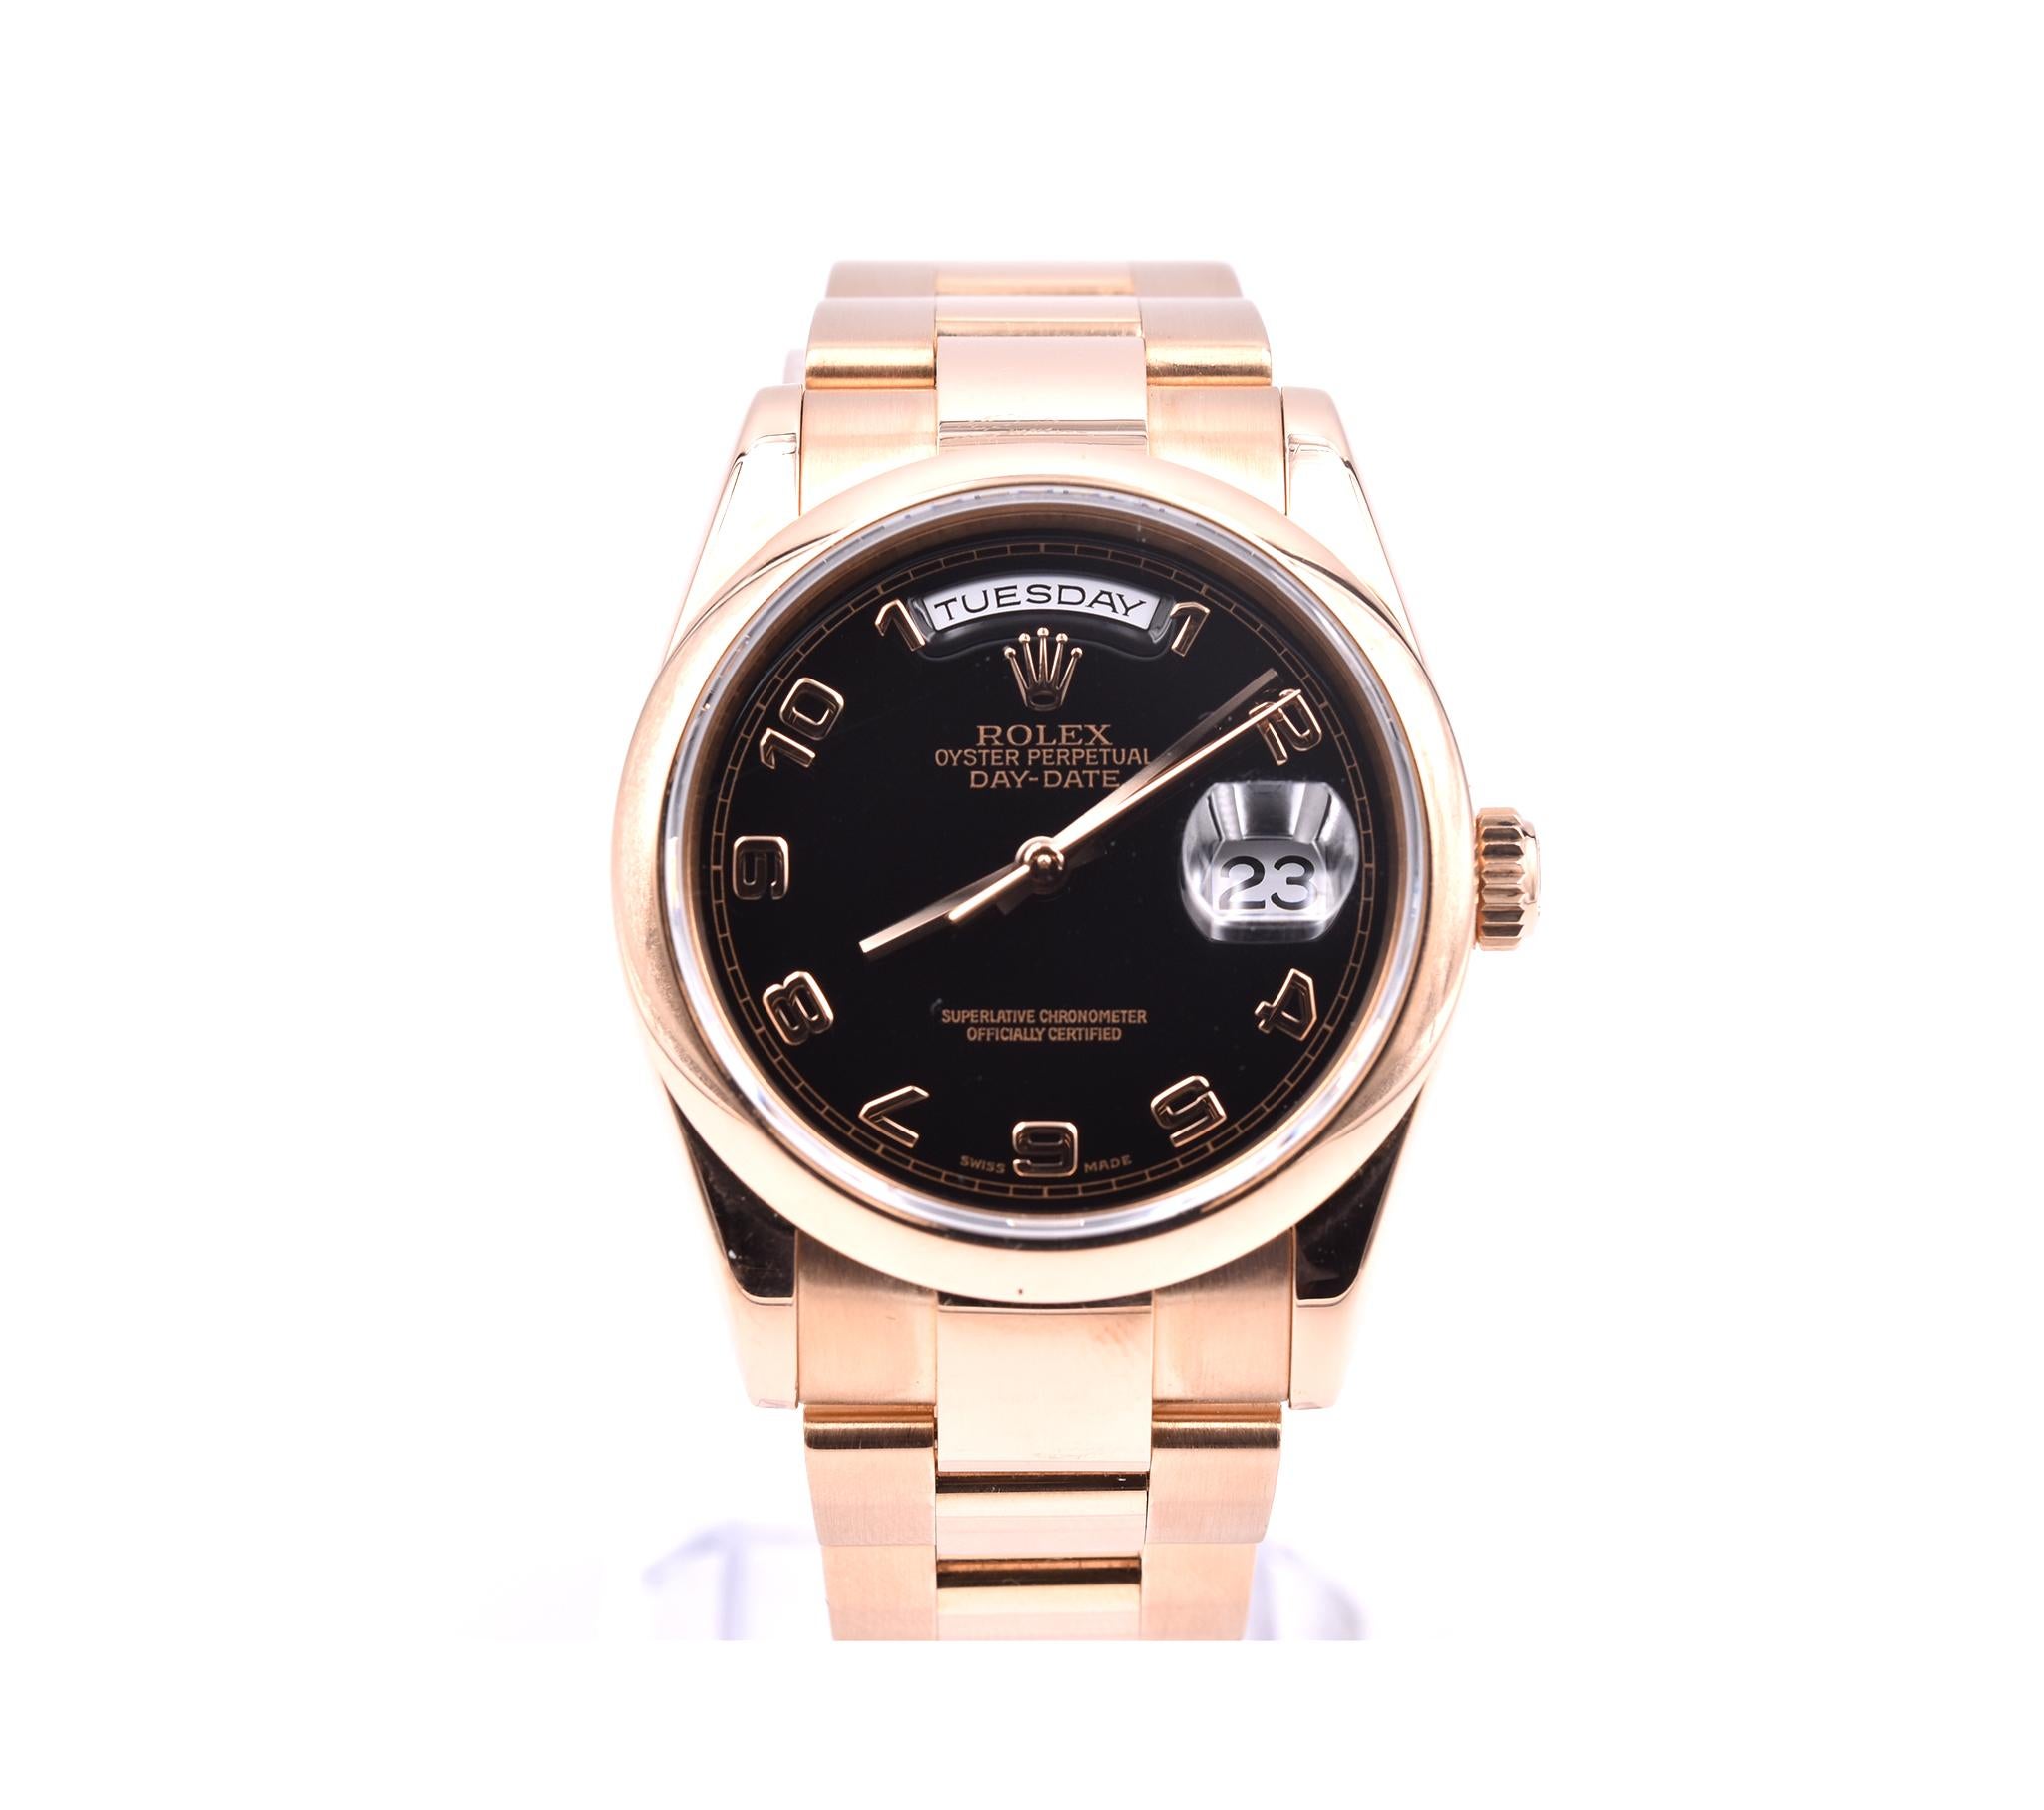 Movement: automatic
Function: hours, minutes, seconds, day, date
Case: 18k rose gold 36mm round case, smooth 18k rose gold bezel, rose gold screw down crown, sapphire protective crystal,
Band: 18k rose gold presidential bracelet with folding